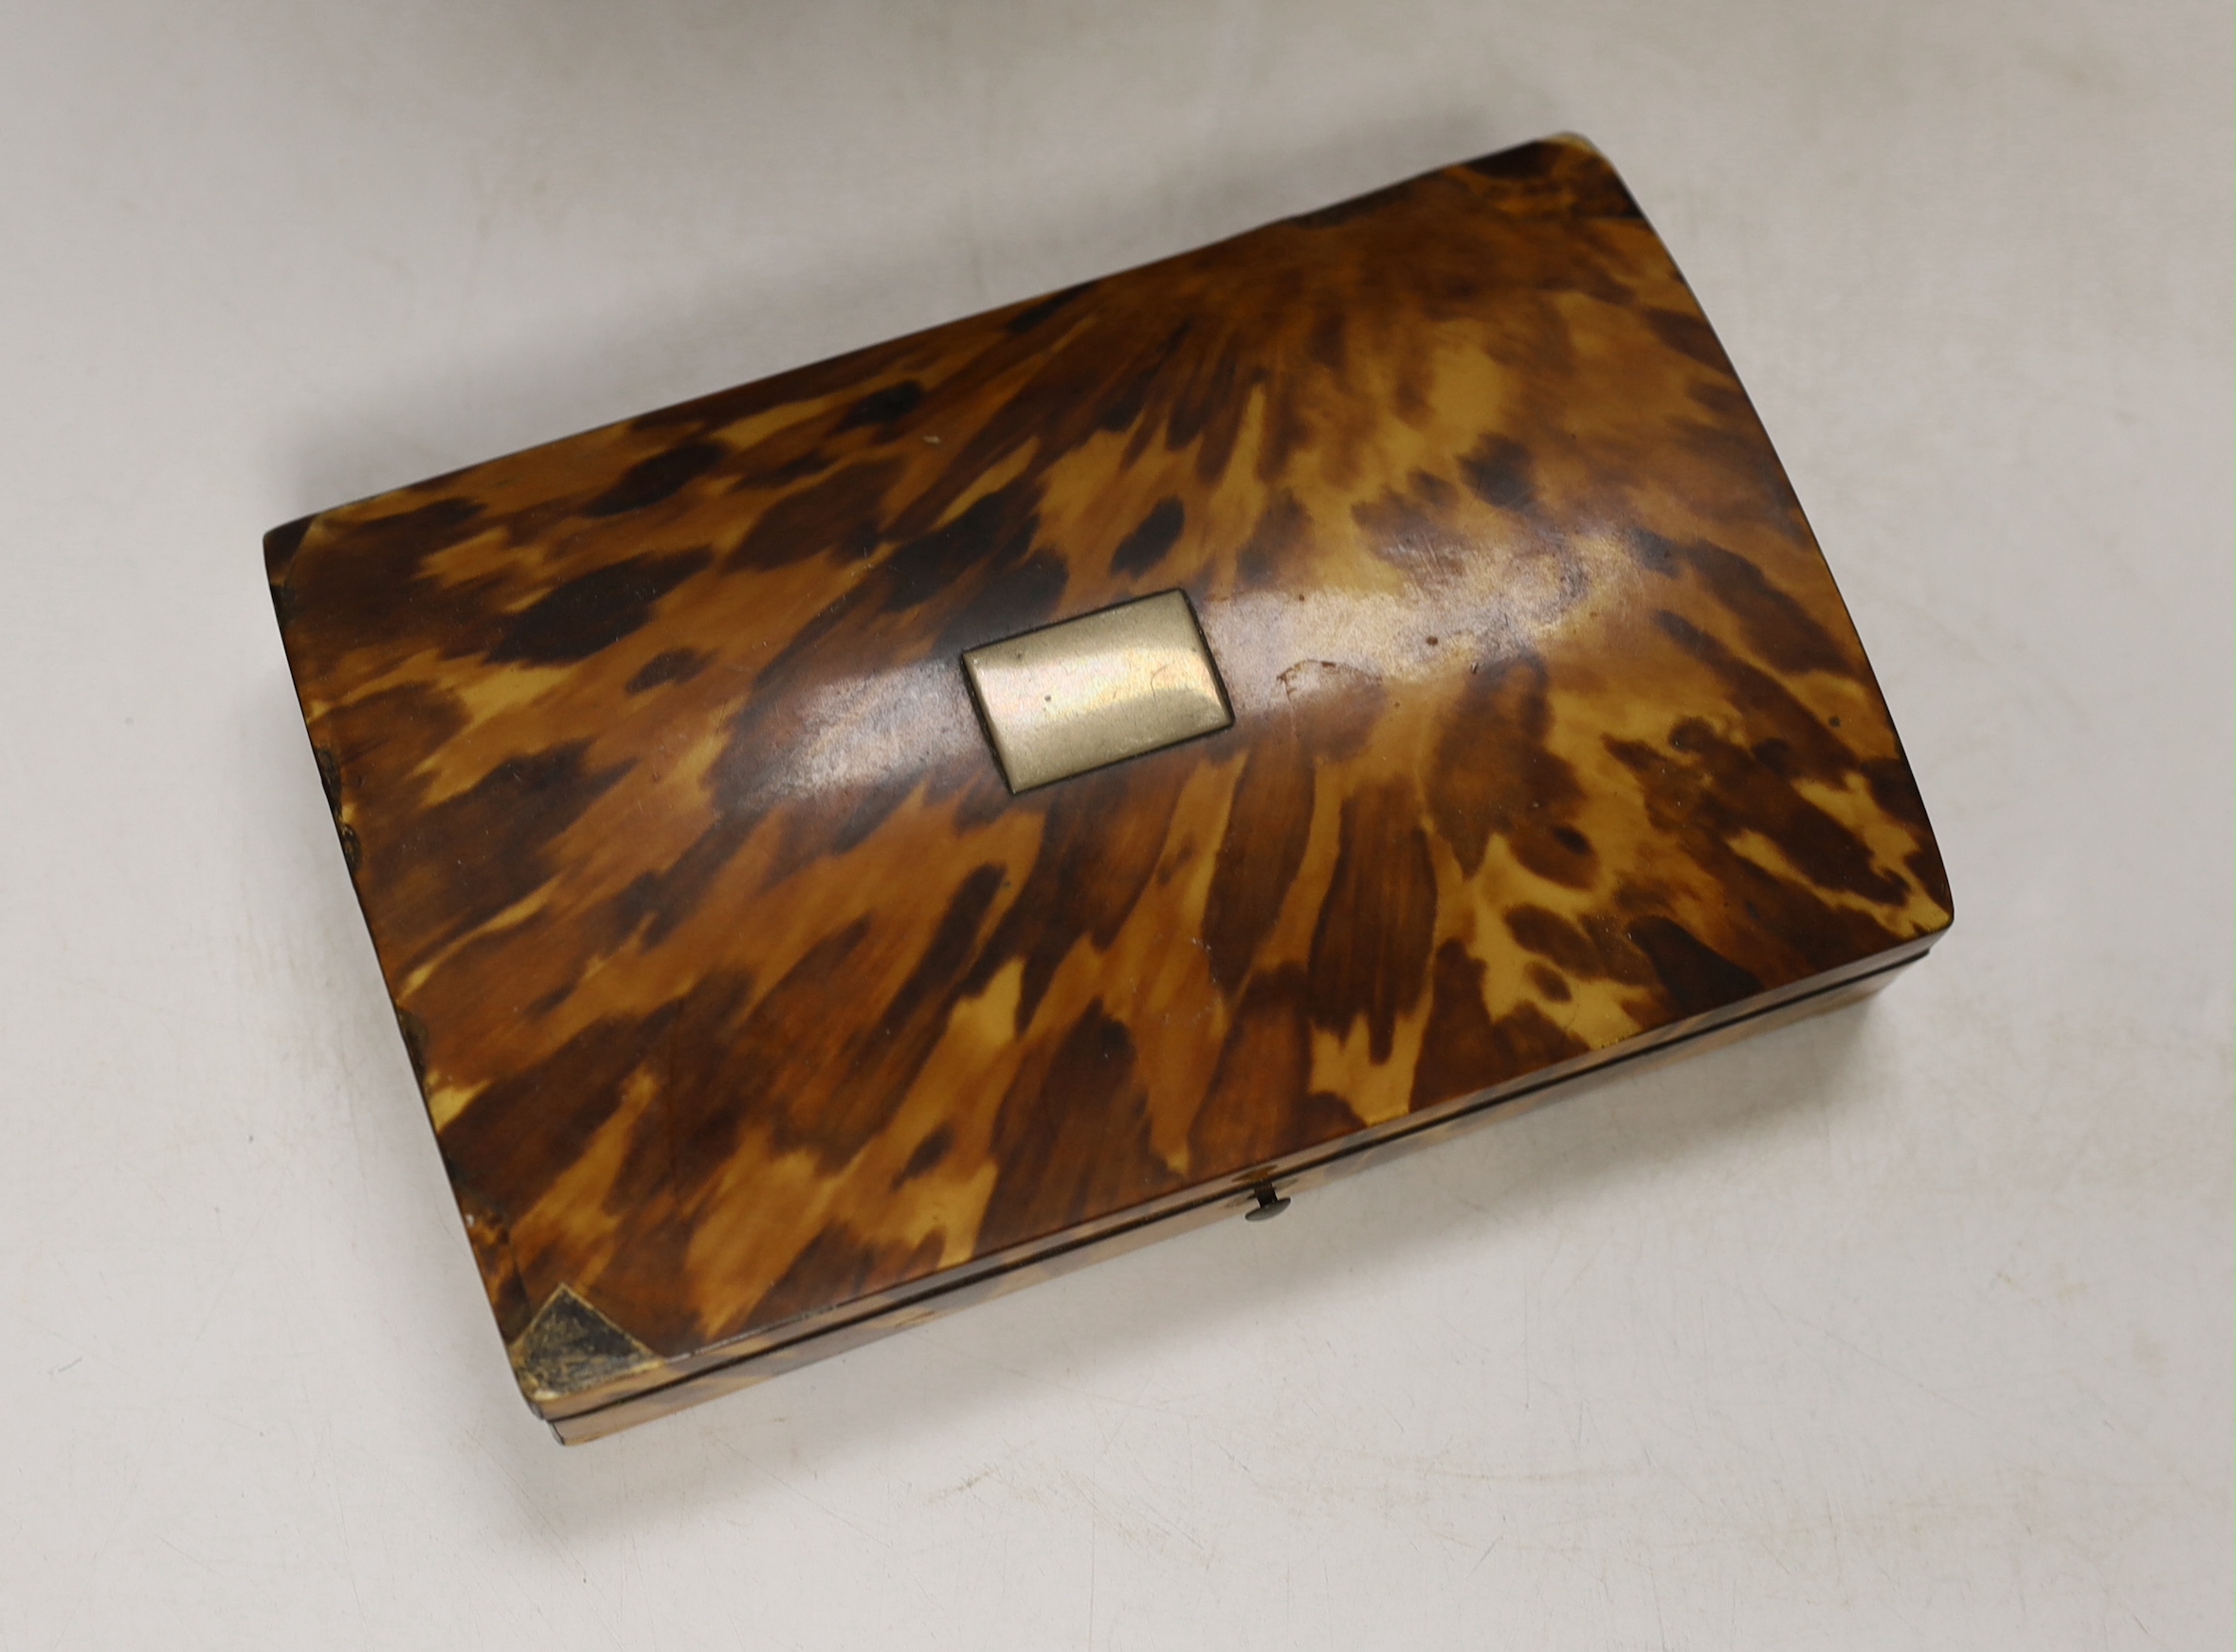 A 19th century two section tortoiseshell tea caddy on ball feet, a tortoiseshell necessaire case and a tortoiseshell and mother of pearl inlaid card case. tea caddy 15cm wide x 11cm high x 9cm deep CITES Submission refer